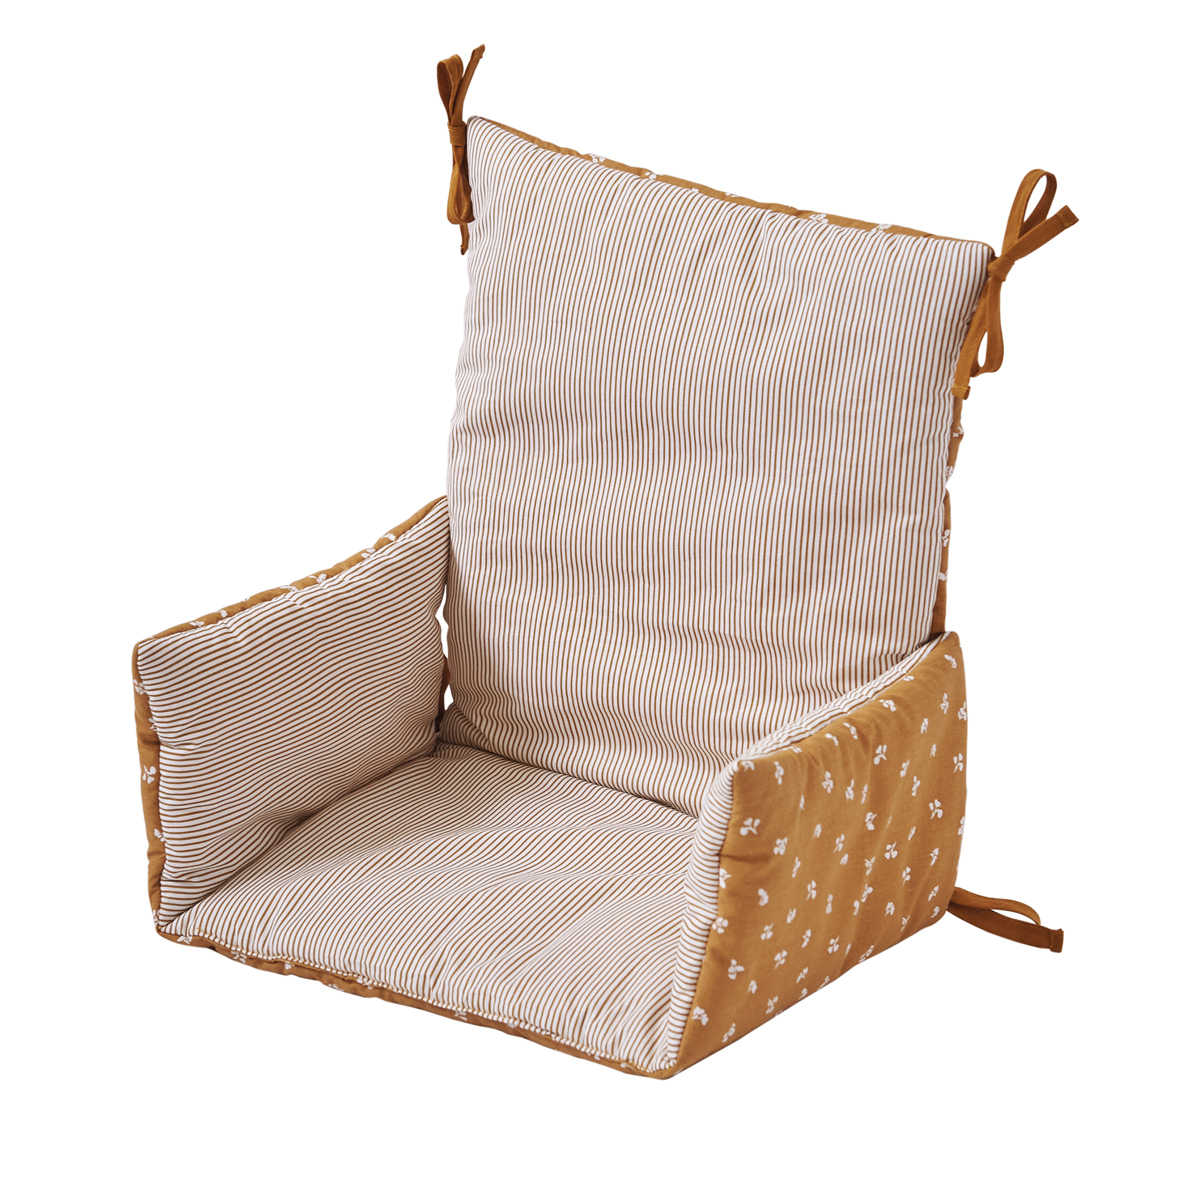 Coussin chaise haute bicolore Thym/curry